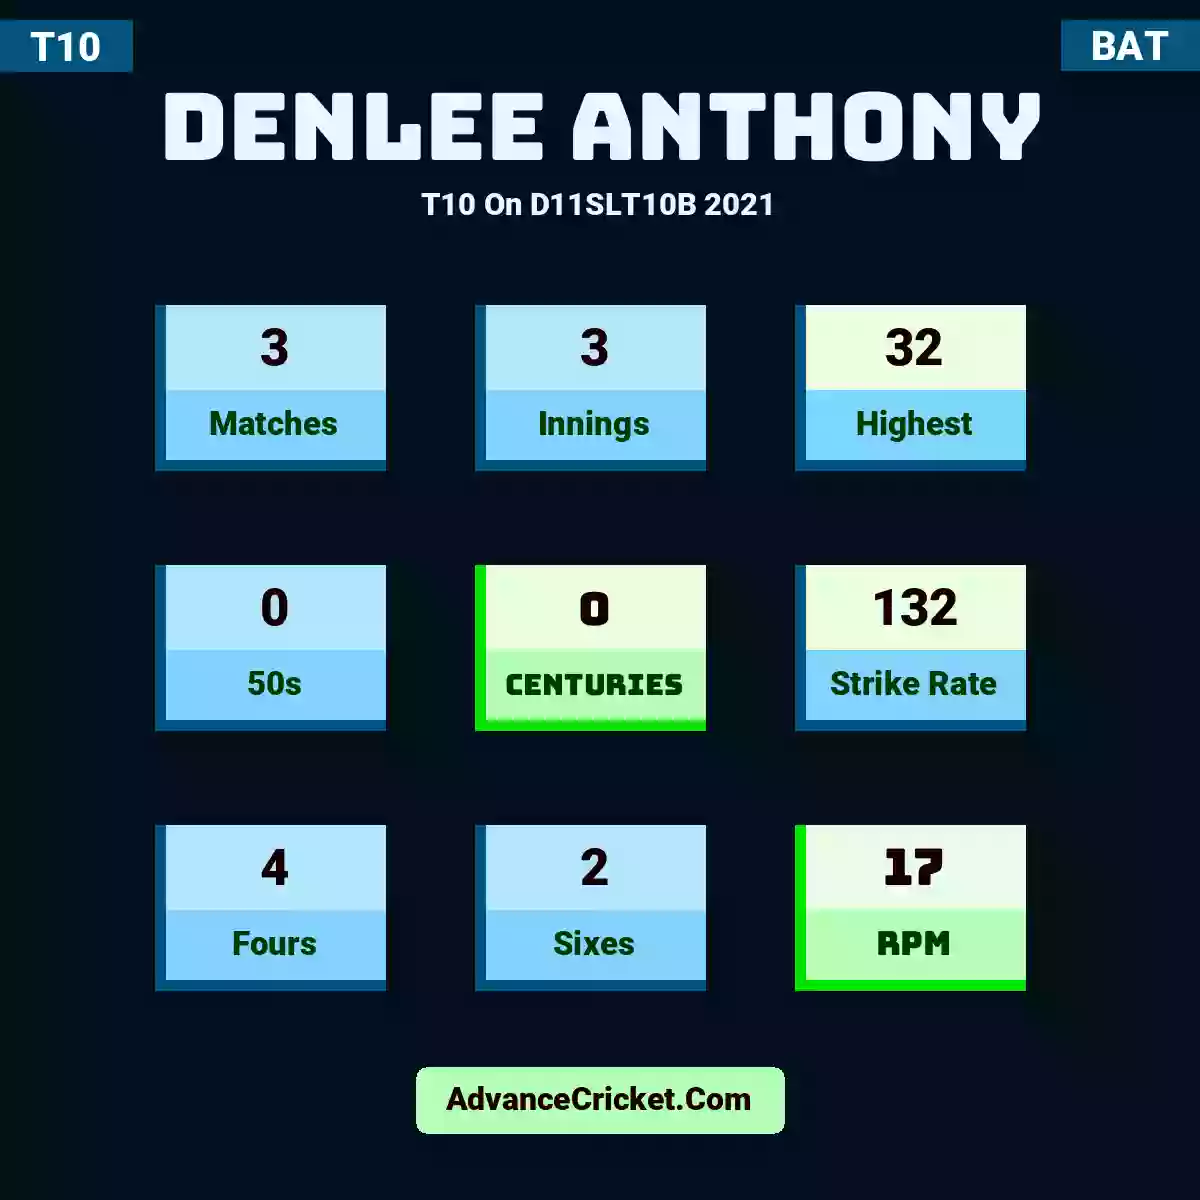 Denlee Anthony T10  On D11SLT10B 2021, Denlee Anthony played 3 matches, scored 32 runs as highest, 0 half-centuries, and 0 centuries, with a strike rate of 132. D.Anthony hit 4 fours and 2 sixes, with an RPM of 17.